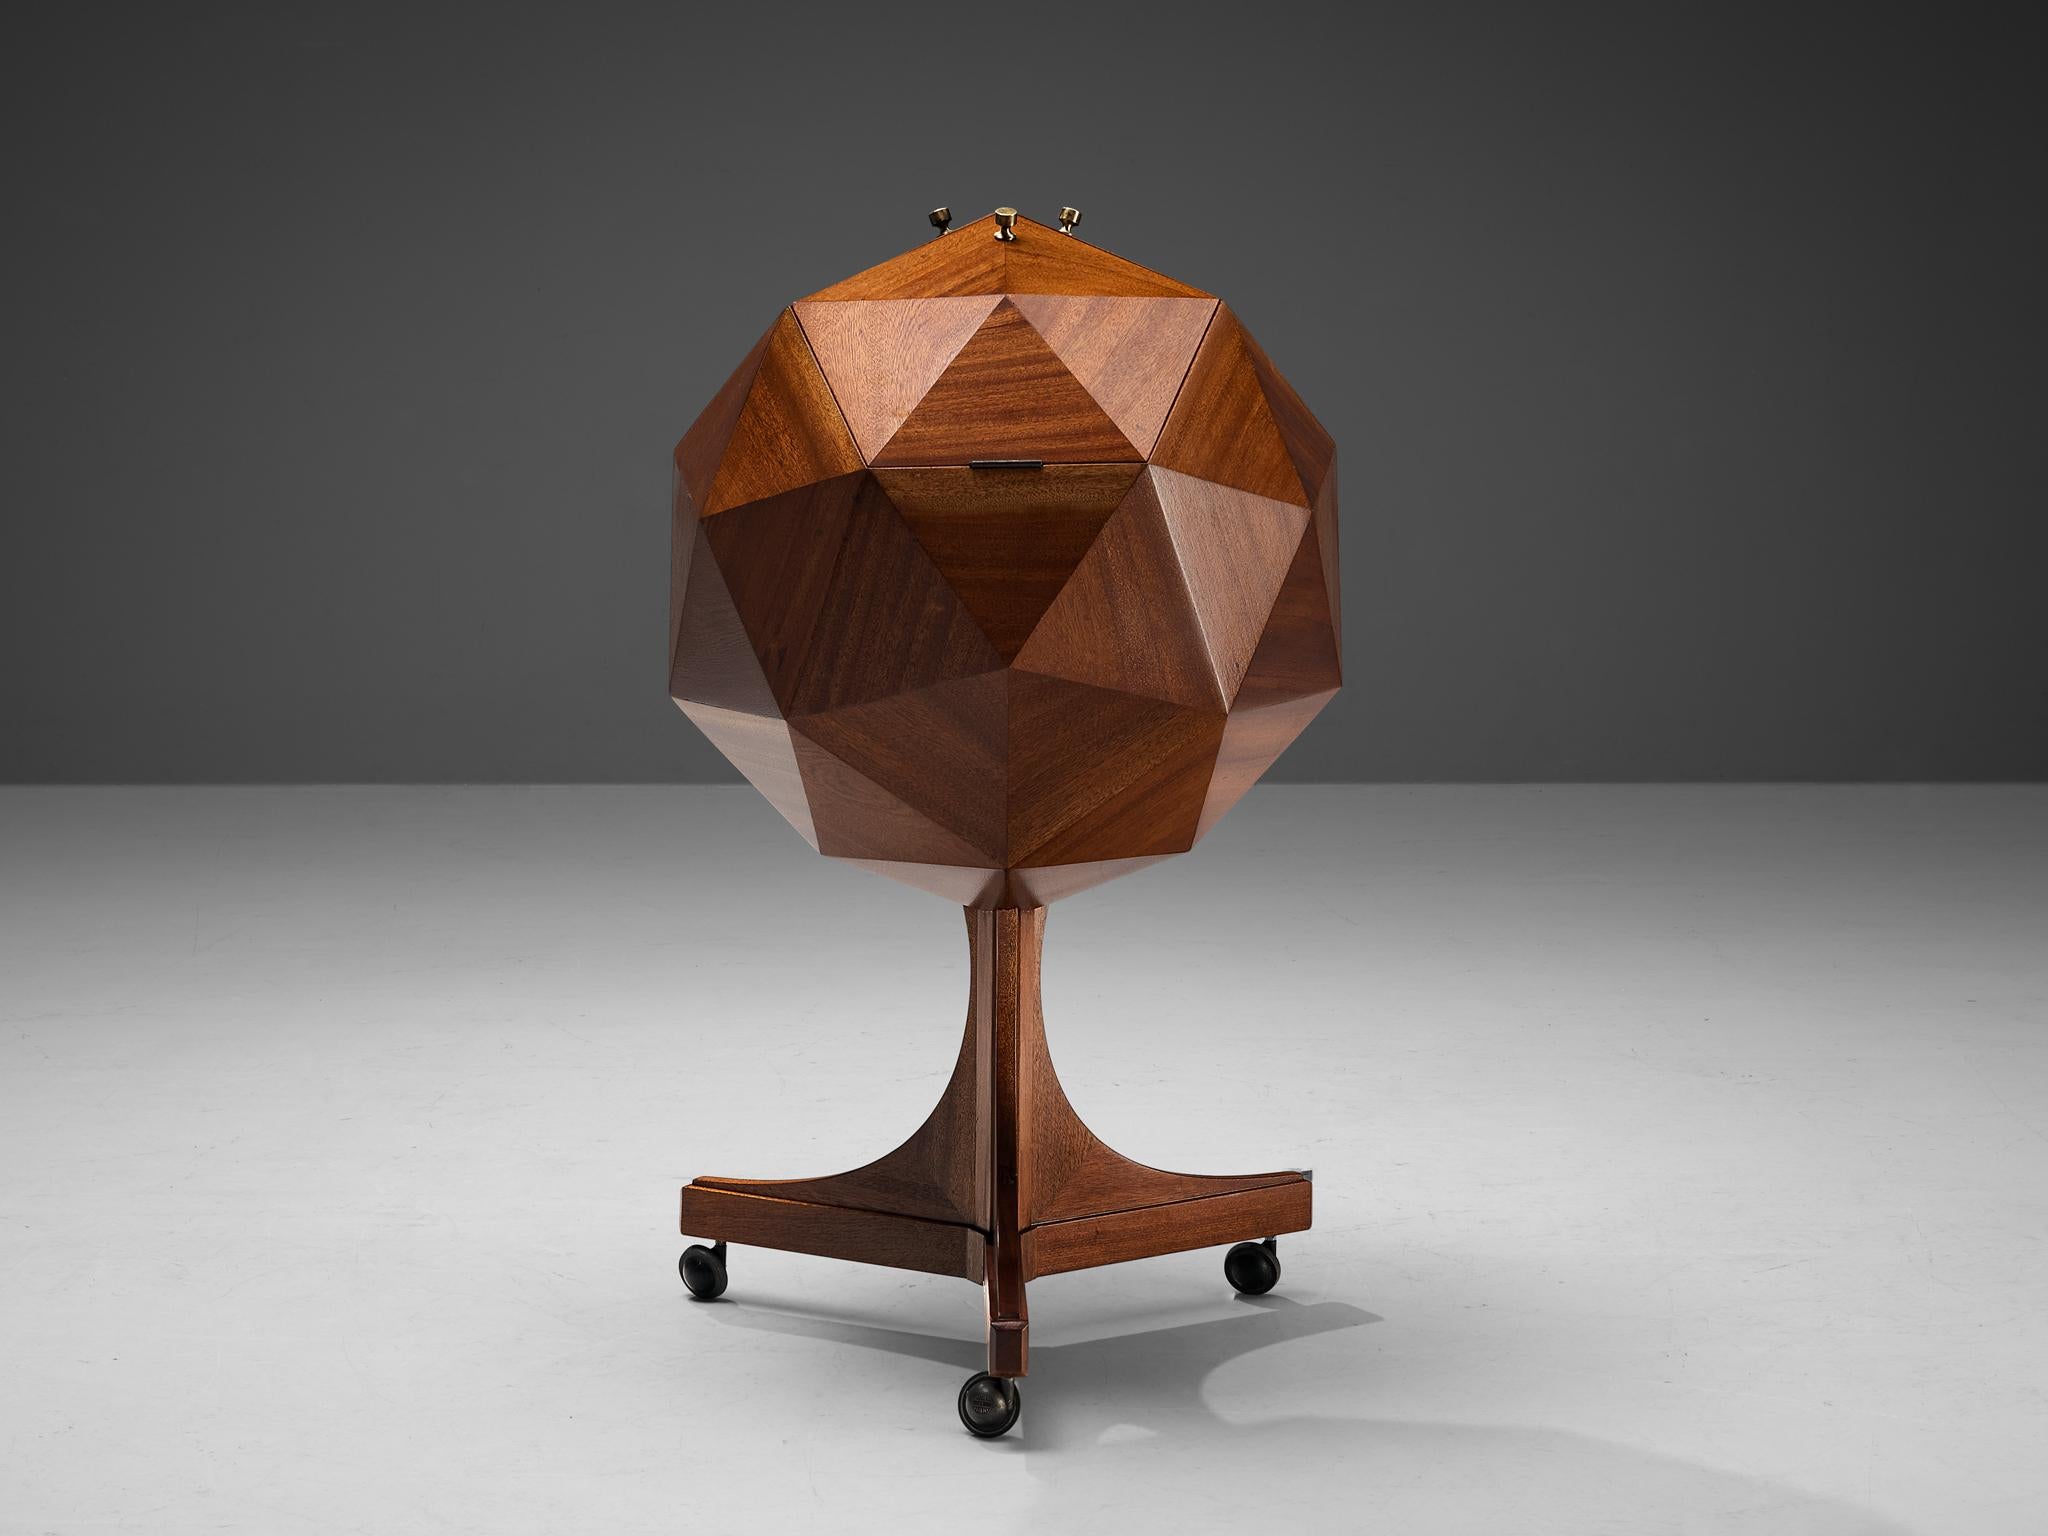 Vuillermoz, dry bar cabinet on wheels, mahogany, metal, France, 1960s

This wonderful movable dry bar cabinet in mahogany was designed by M. Vuillermoz in the 1960s. The polyhedron shape of the bar rests on a base on wheels. Three elements on top